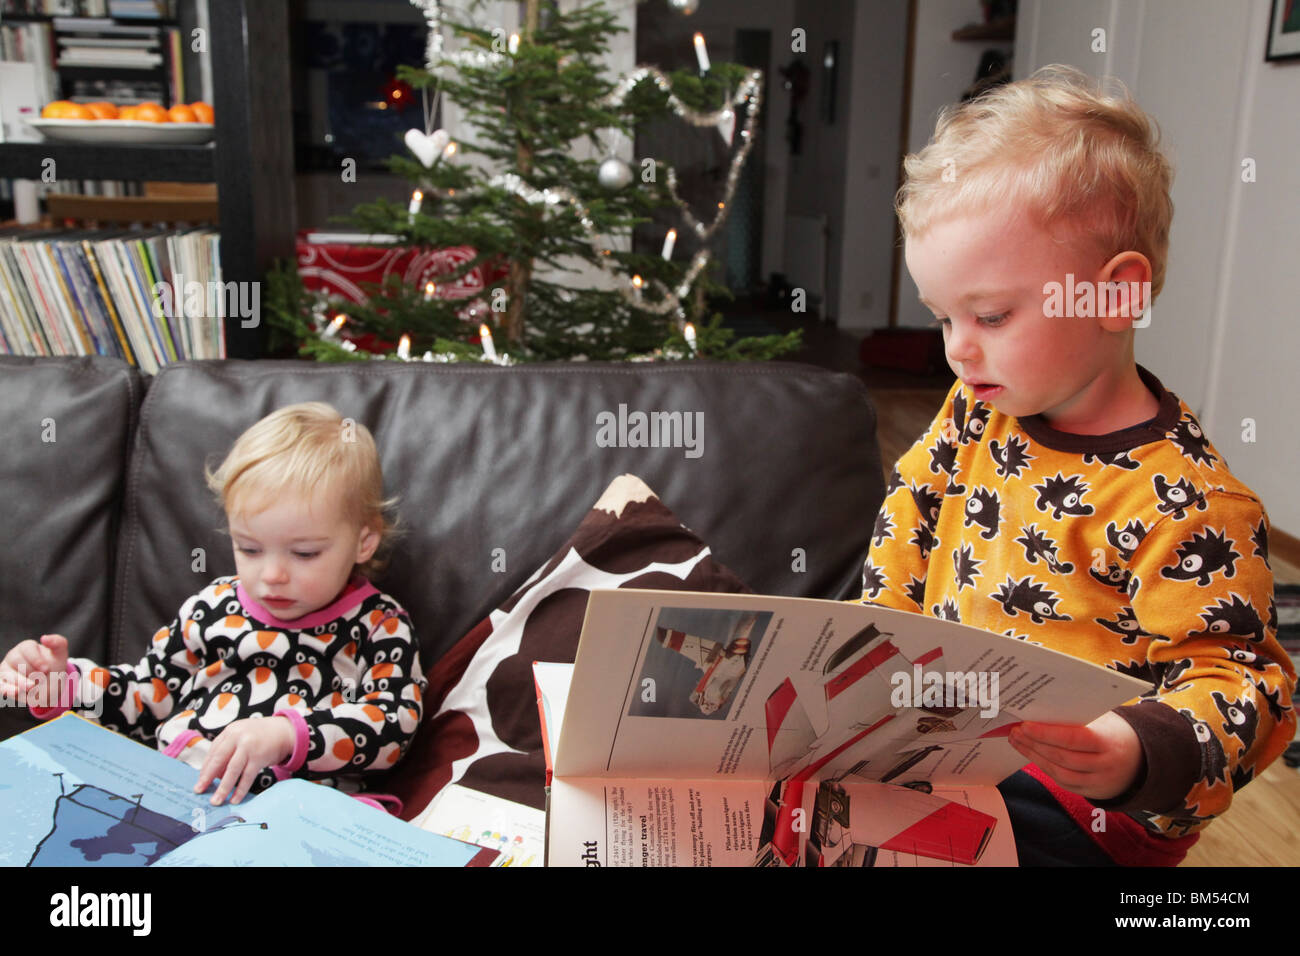 A brother and sister baby toddlers sit at home together reading books next to a Christmas Tree Stock Photo